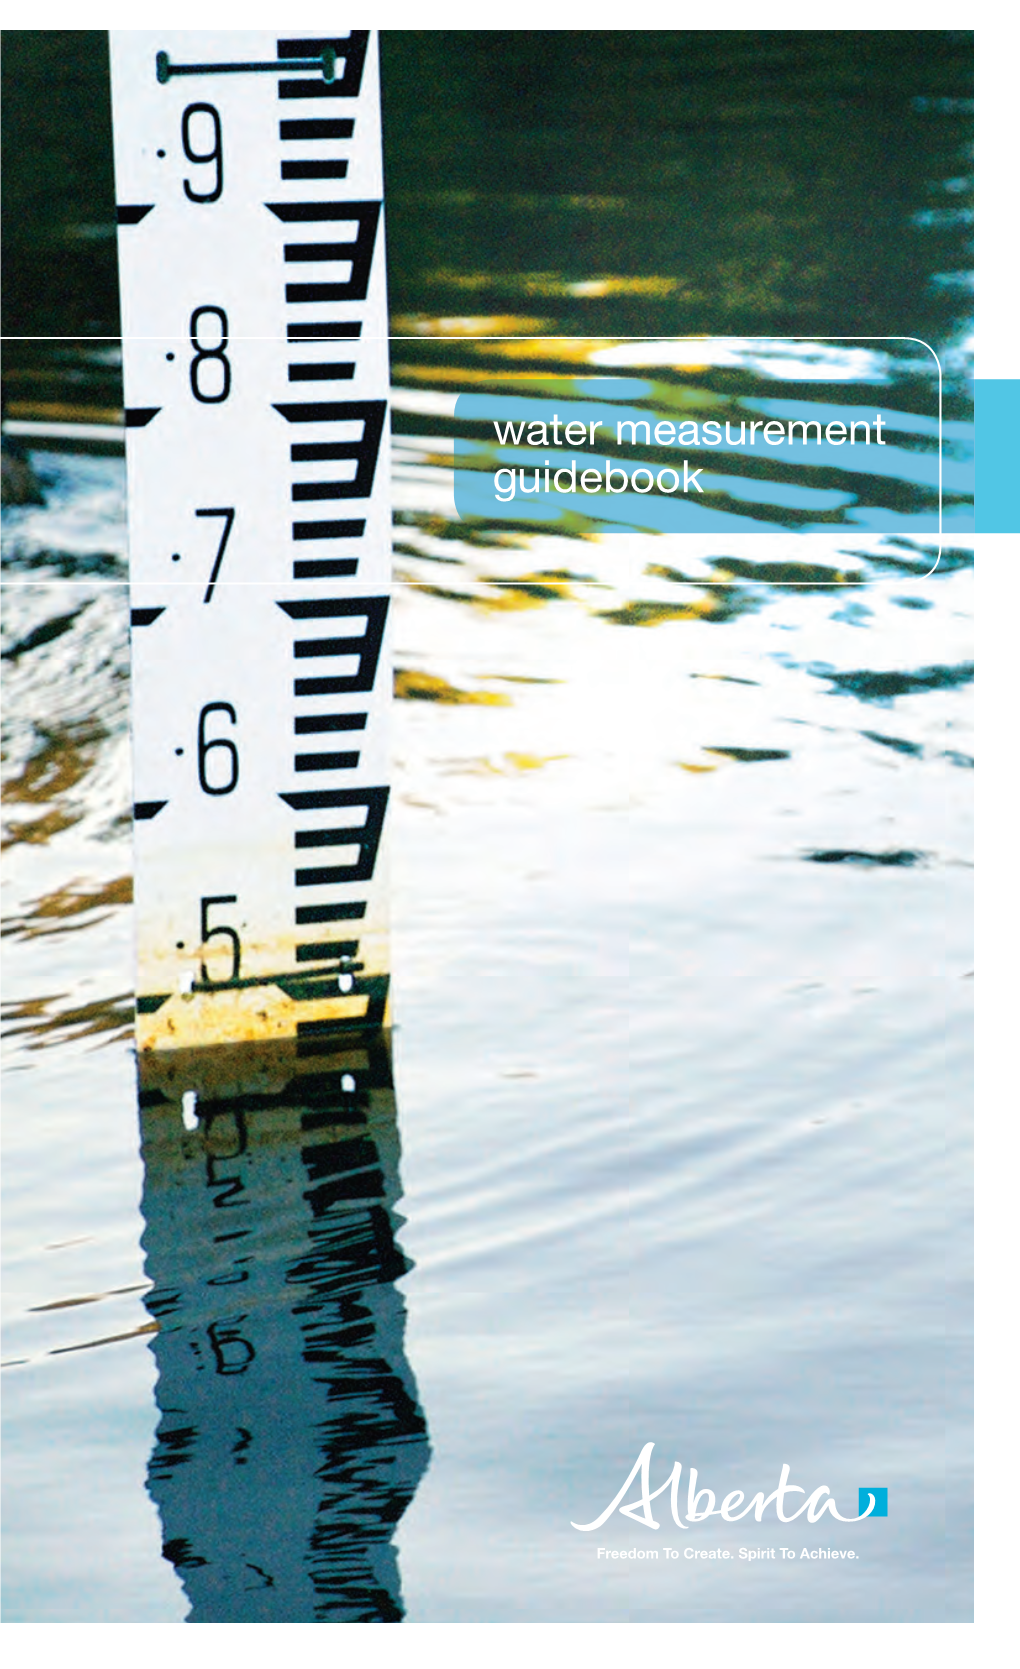 Water Measurement Guidebook TABLE of CONTENTS